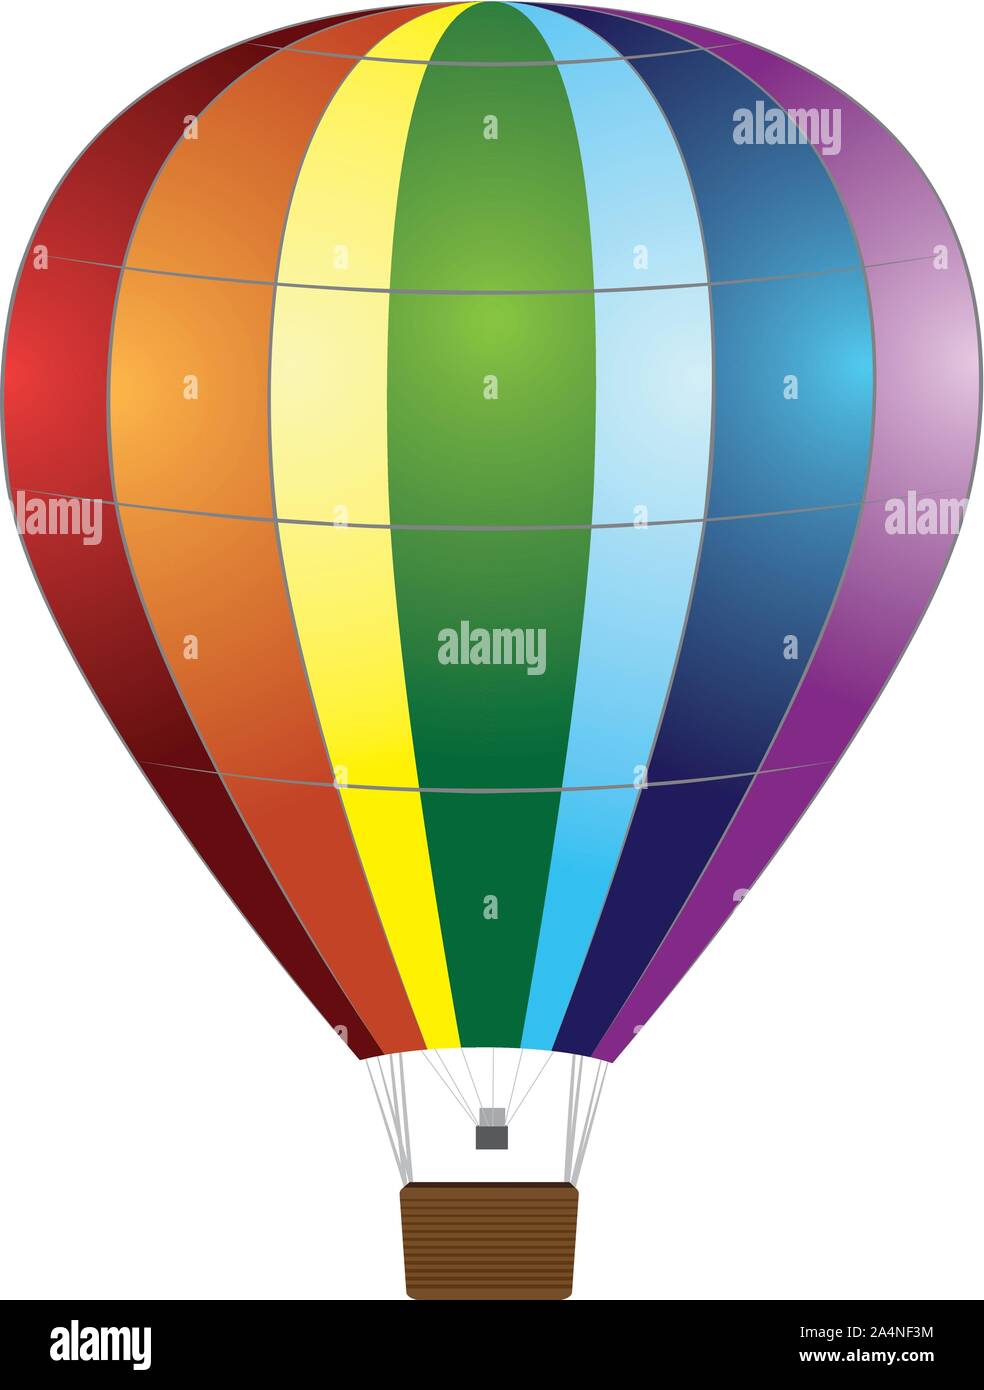 Colorful hot air balloon on white background. Stock Vector